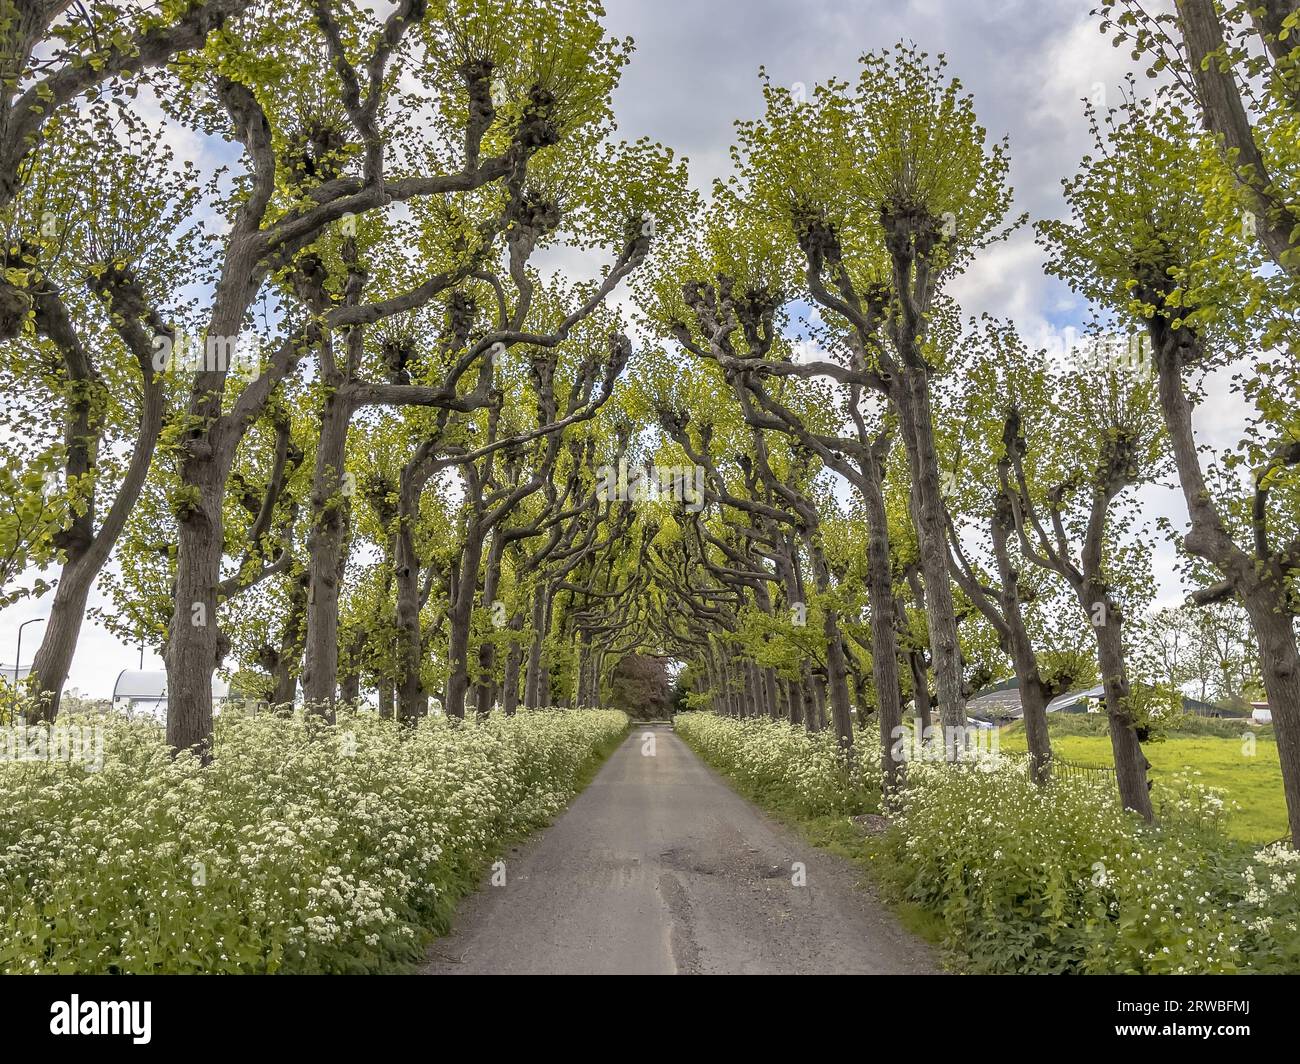 Tilia Linden Trees with cow Parsley flower (Anthriscus sylvestris) and garlic mustard (Alliaria petiolata) along old Avenue lane in Groninge Province, Stock Photo